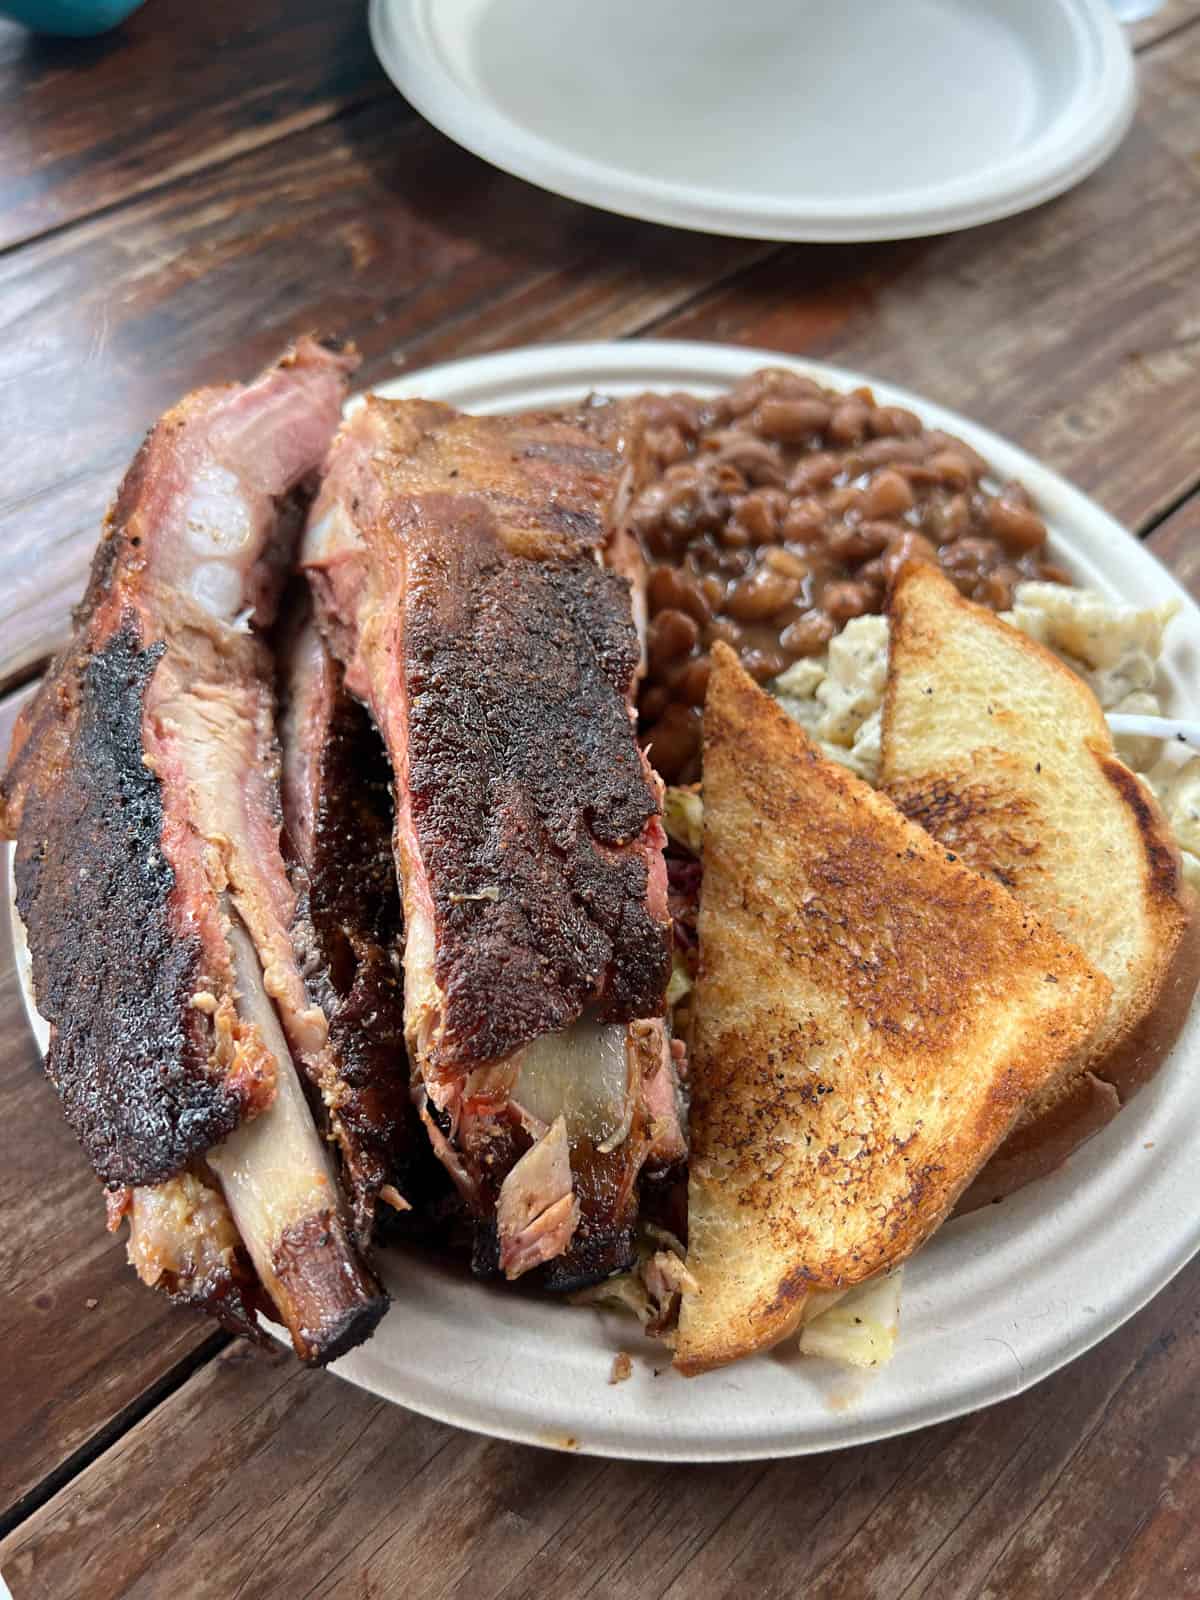 A plate of bbq food.